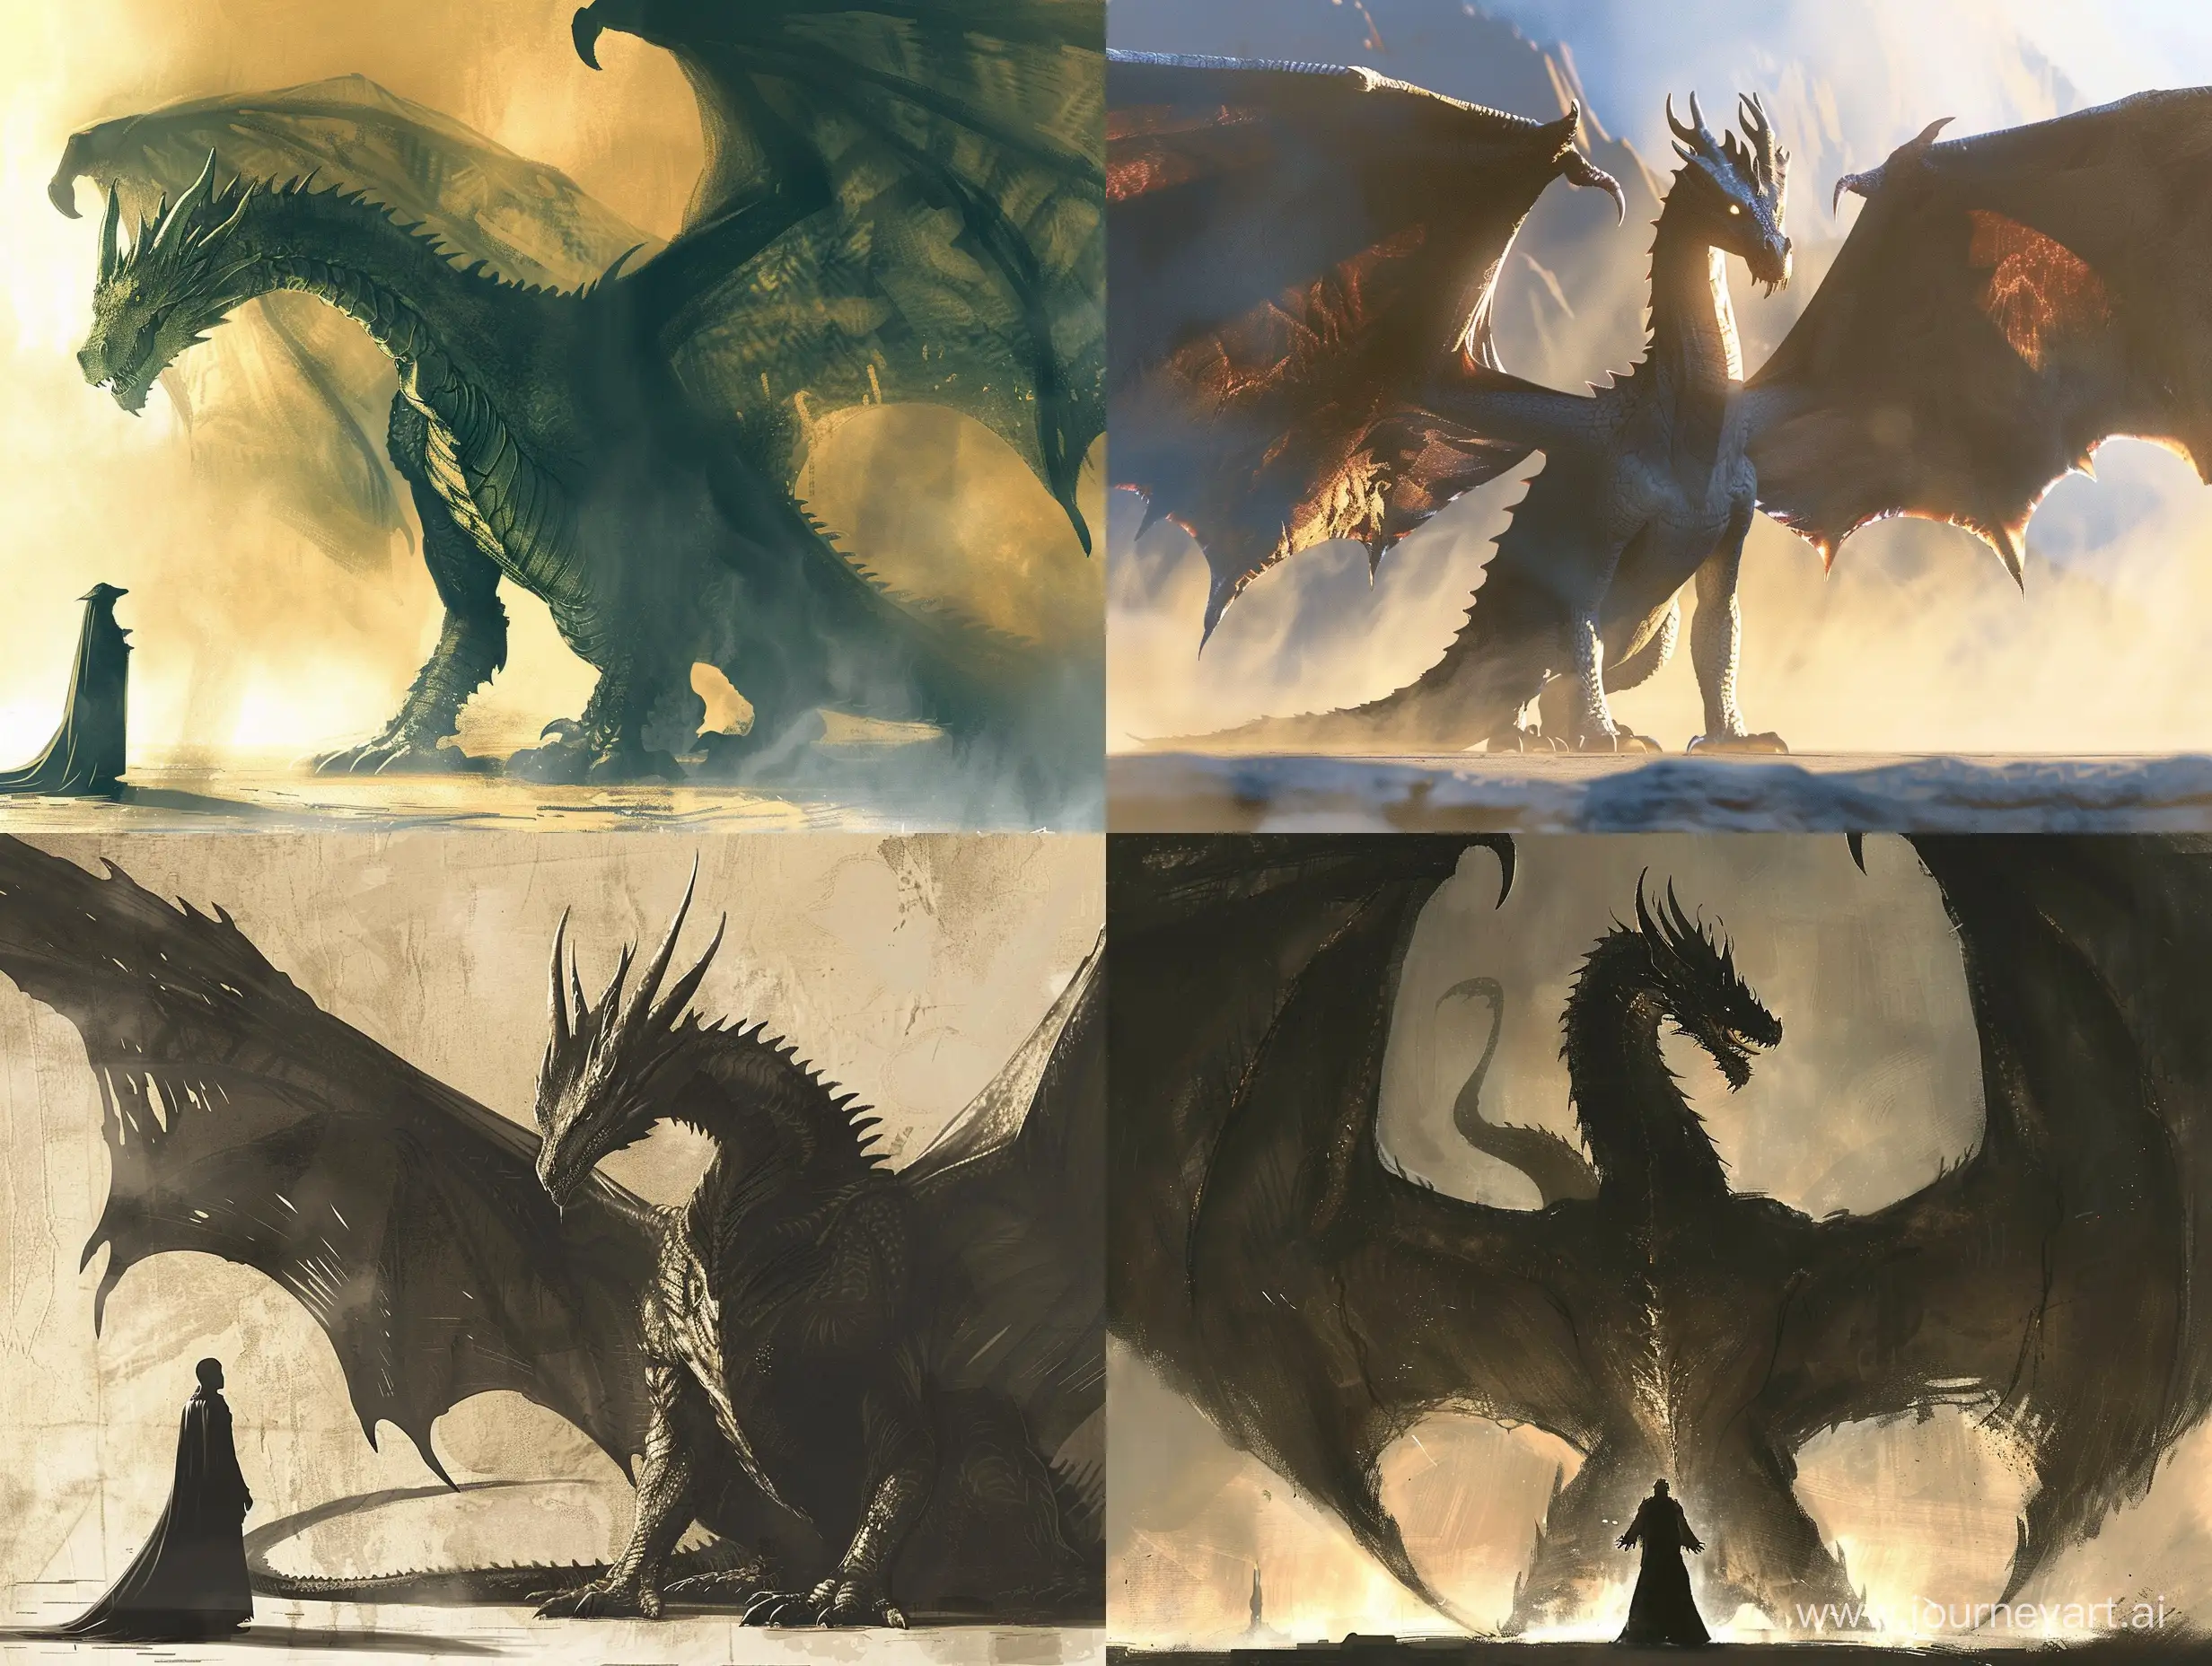 Majestic-Dragon-Spreading-Its-Enormous-Wings-and-Casting-a-Formidable-Shadow